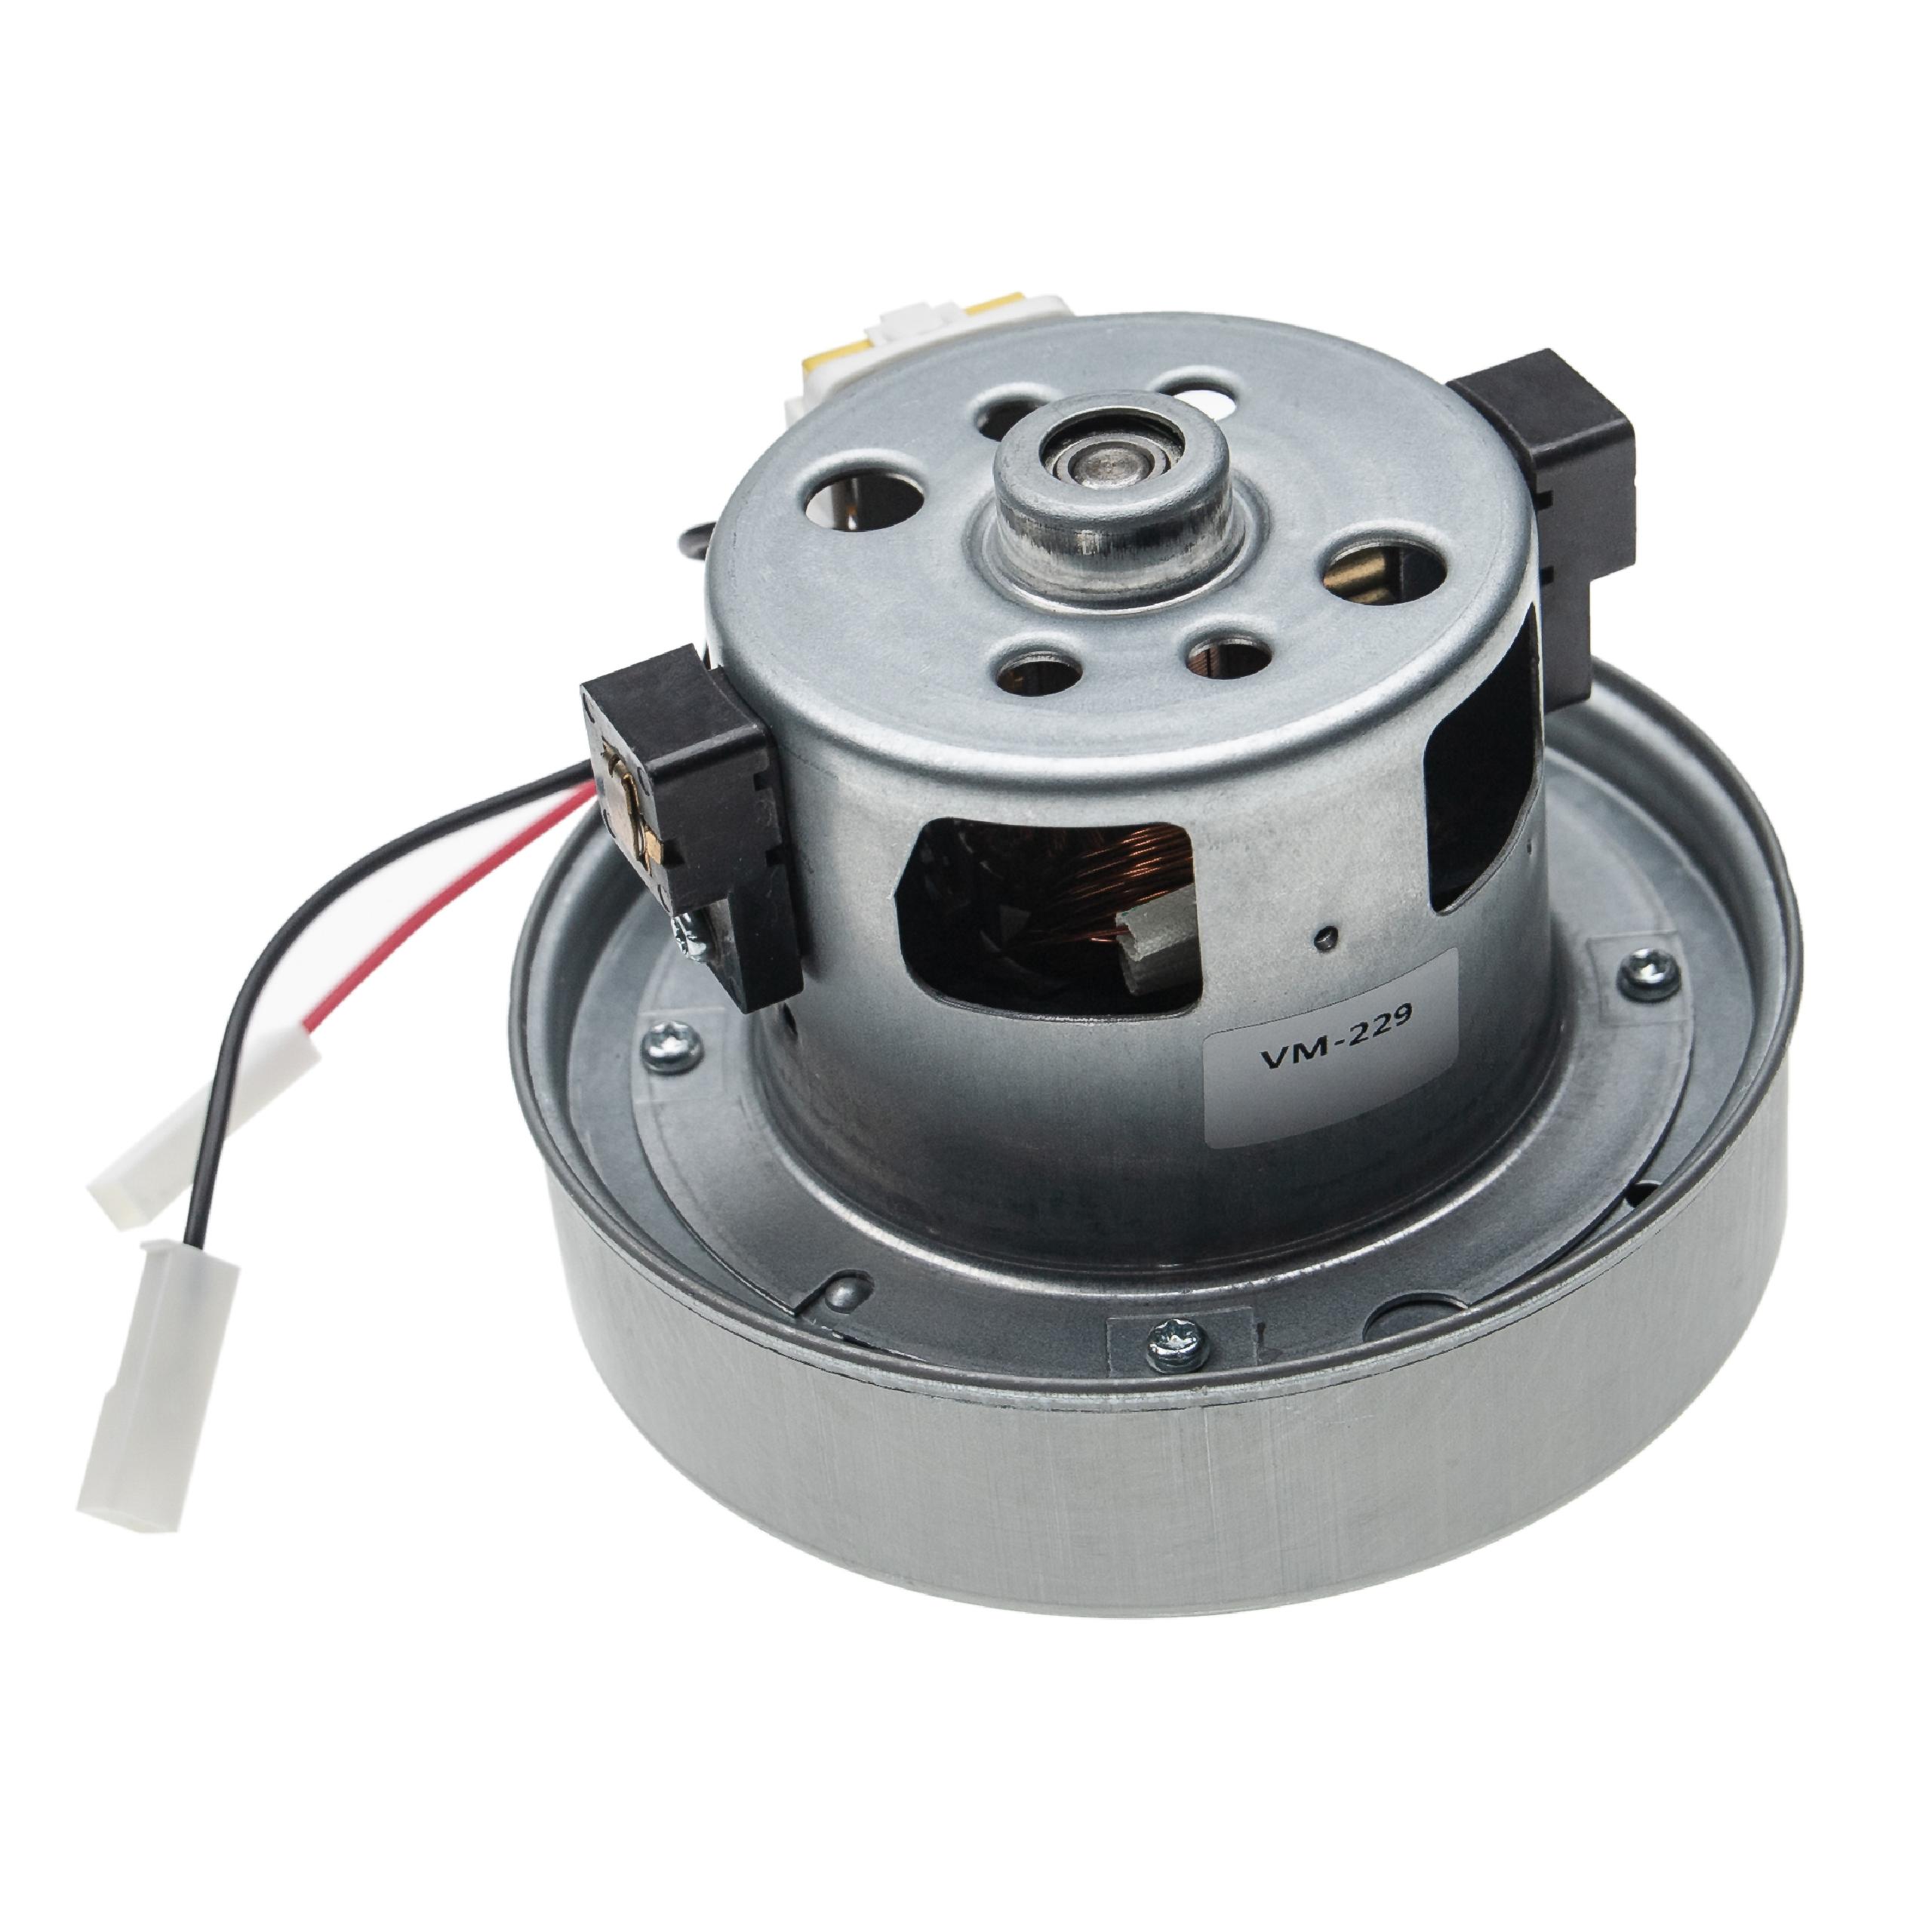 Motor with Connection Cable Replacement for Dyson 905358-06, 905358-05 for Dyson Vacuum Cleaner - Spare Motor